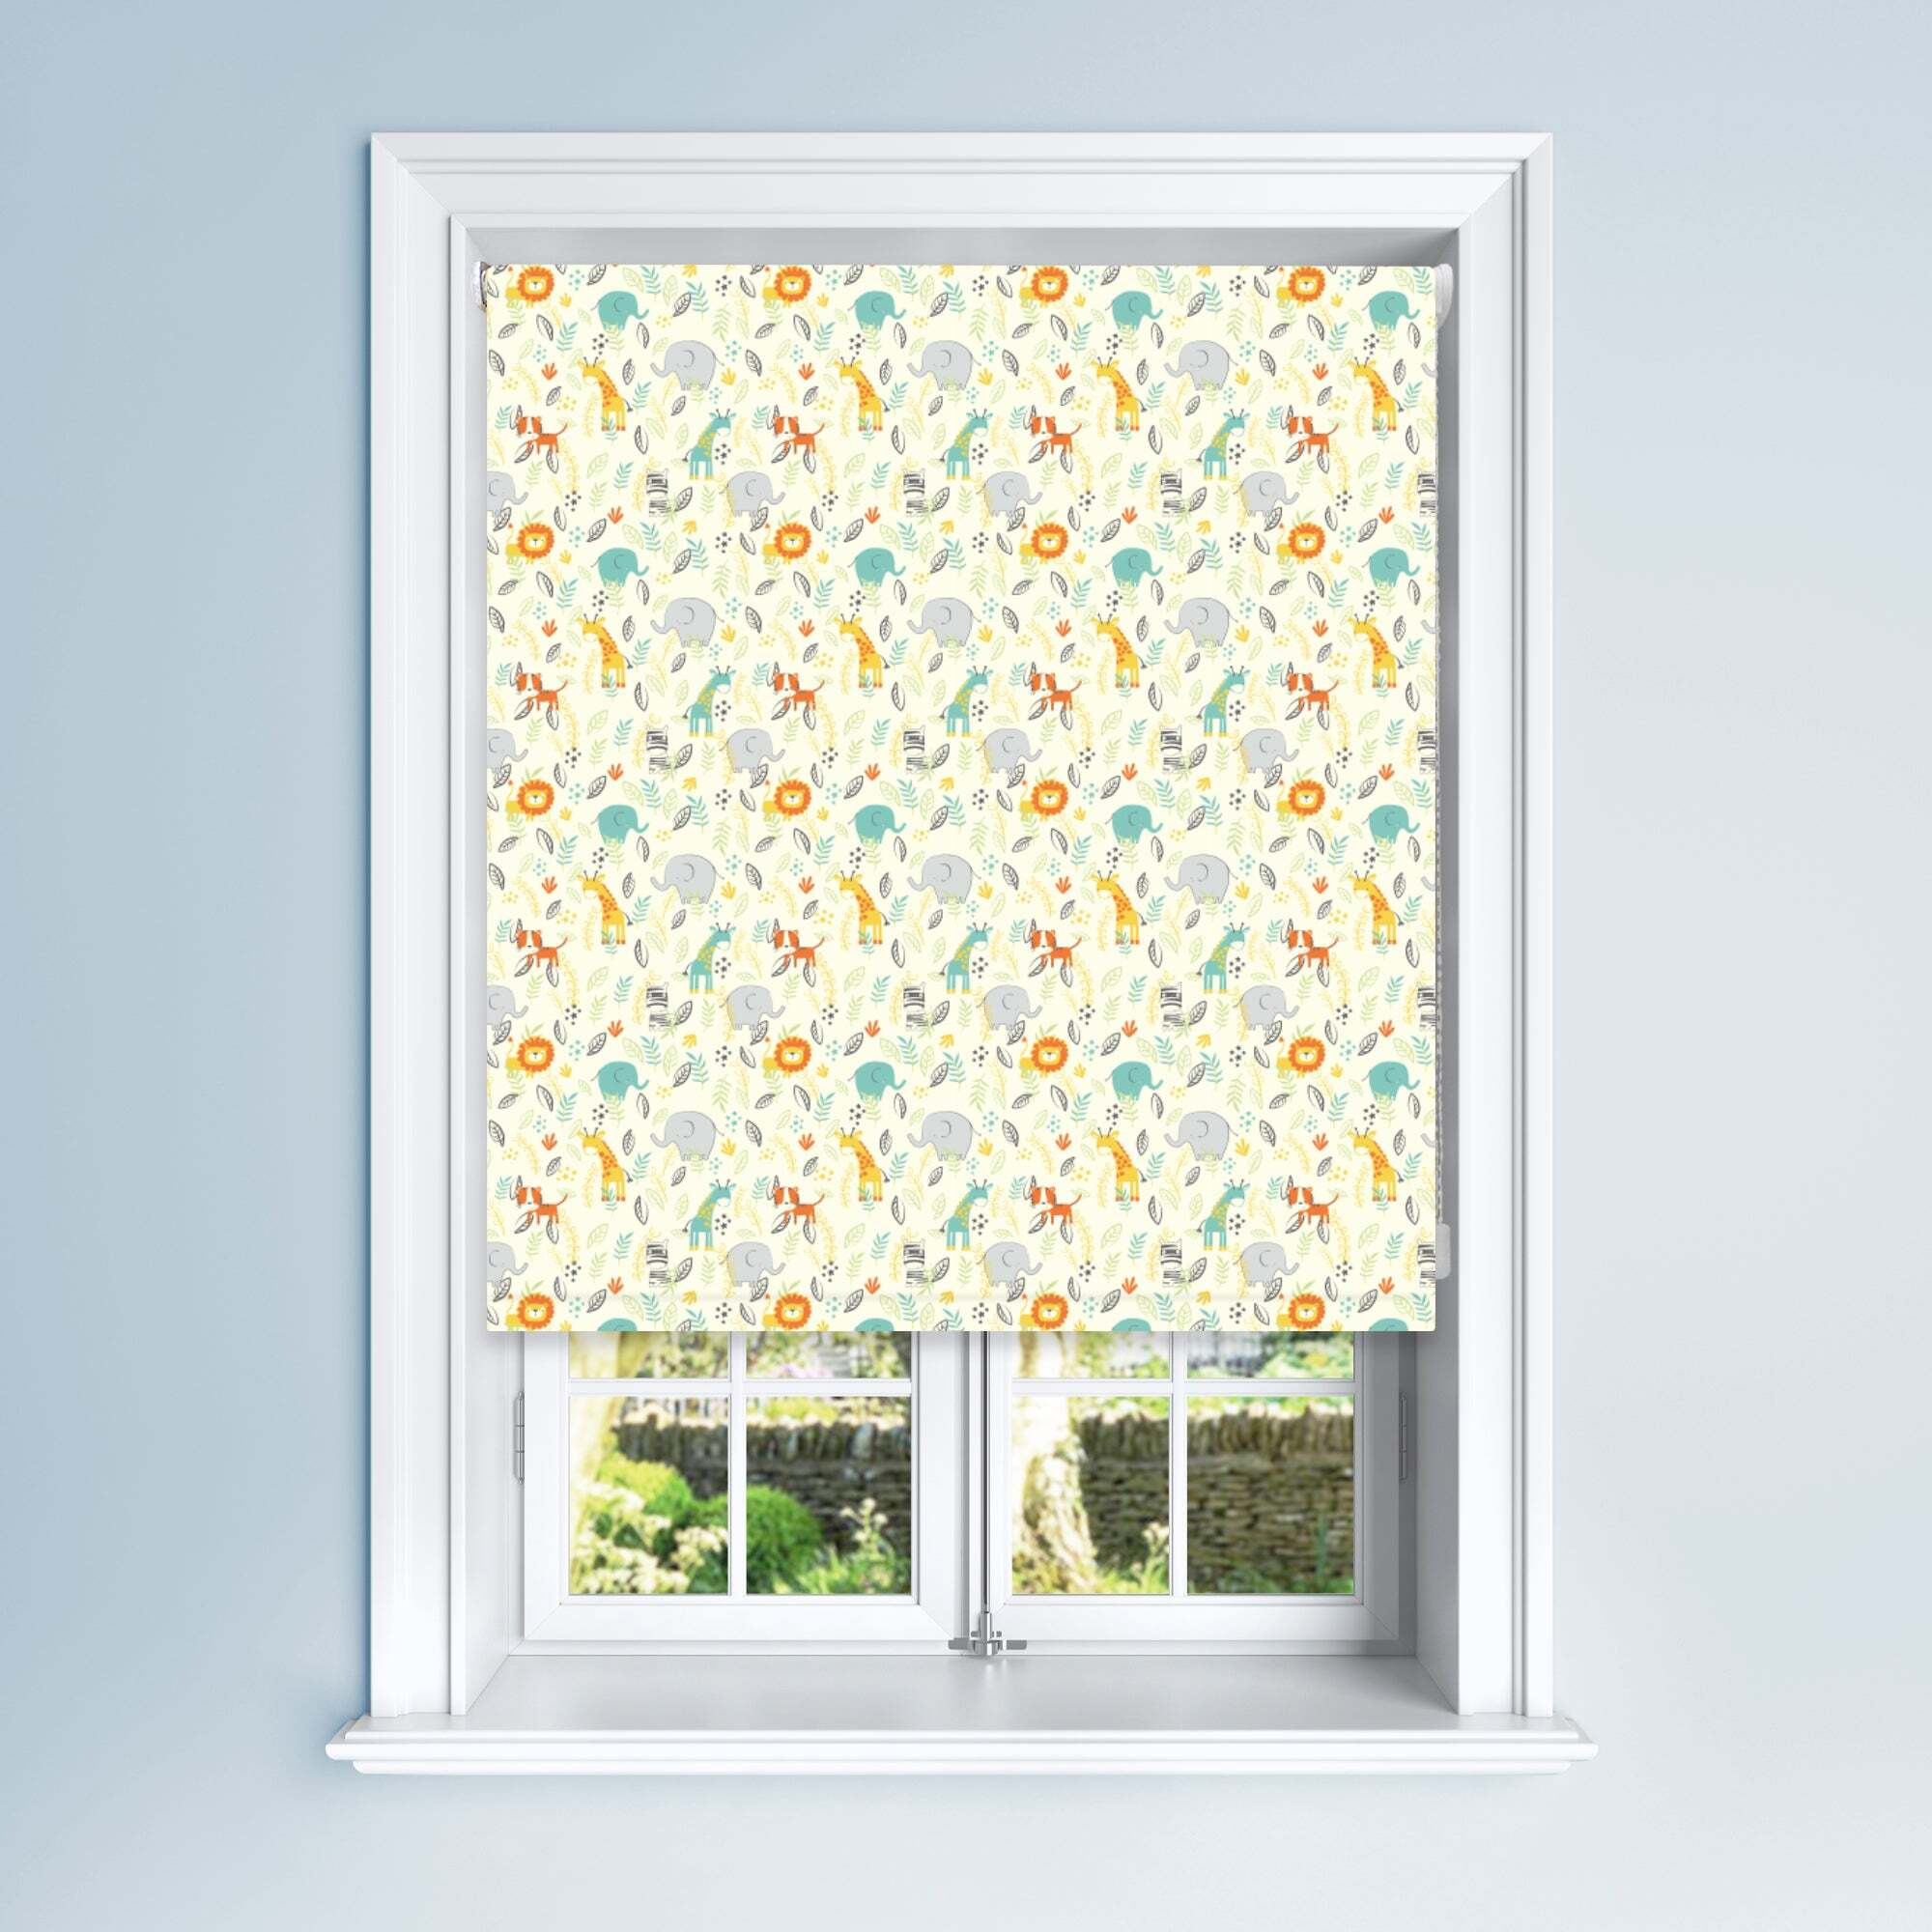 Blue Zoo Friends Blackout Roller Blind Blue, White and Yellow